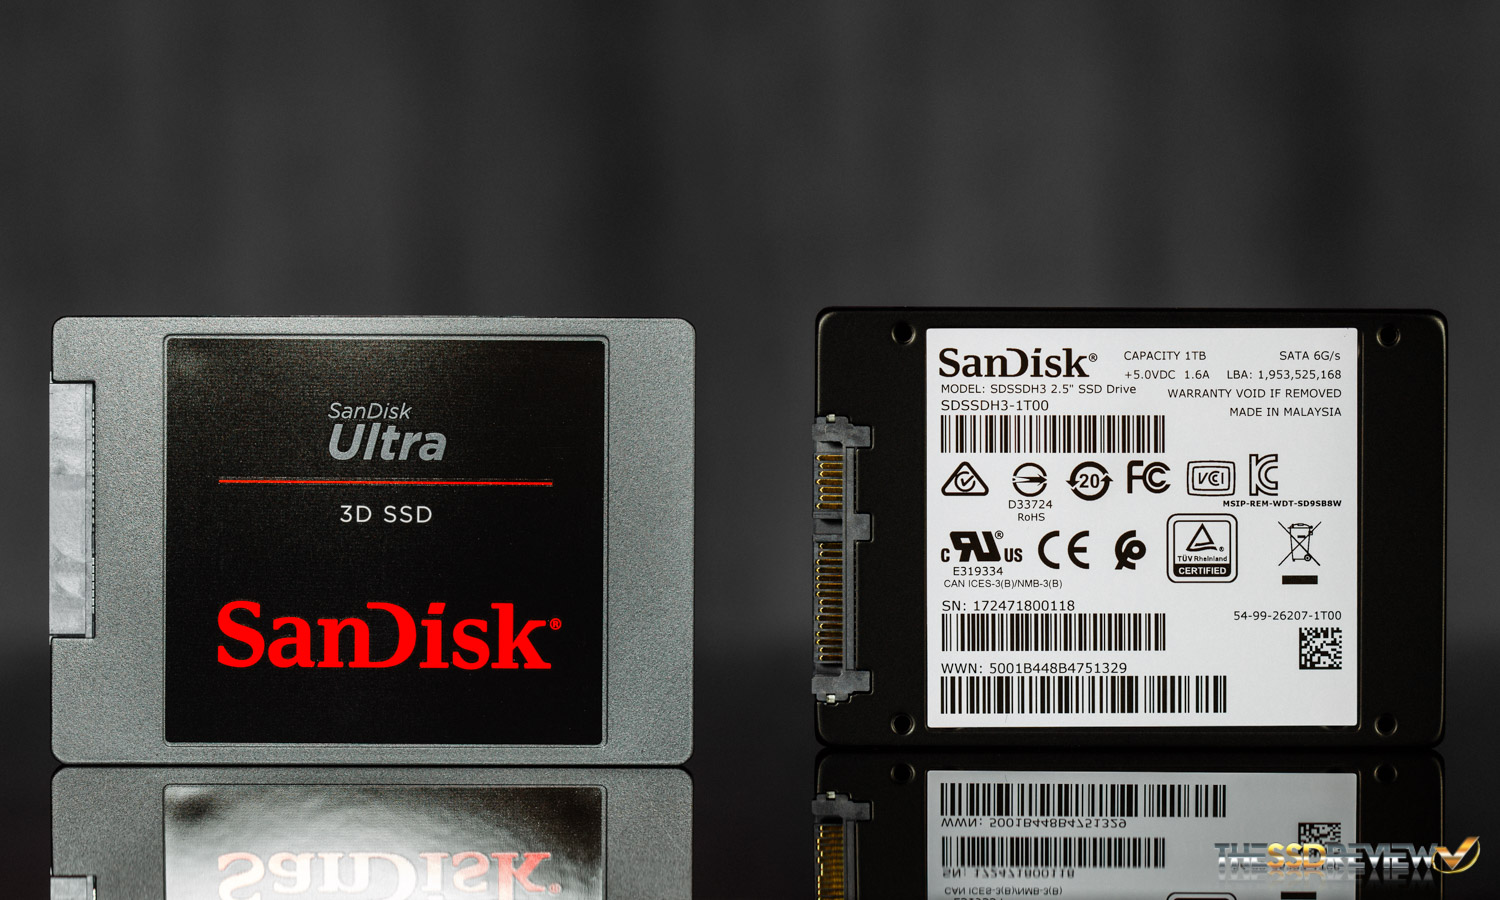 WD Blue 3D SSD & SanDisk Ultra 3D SSD Review (1TB) - Twins That